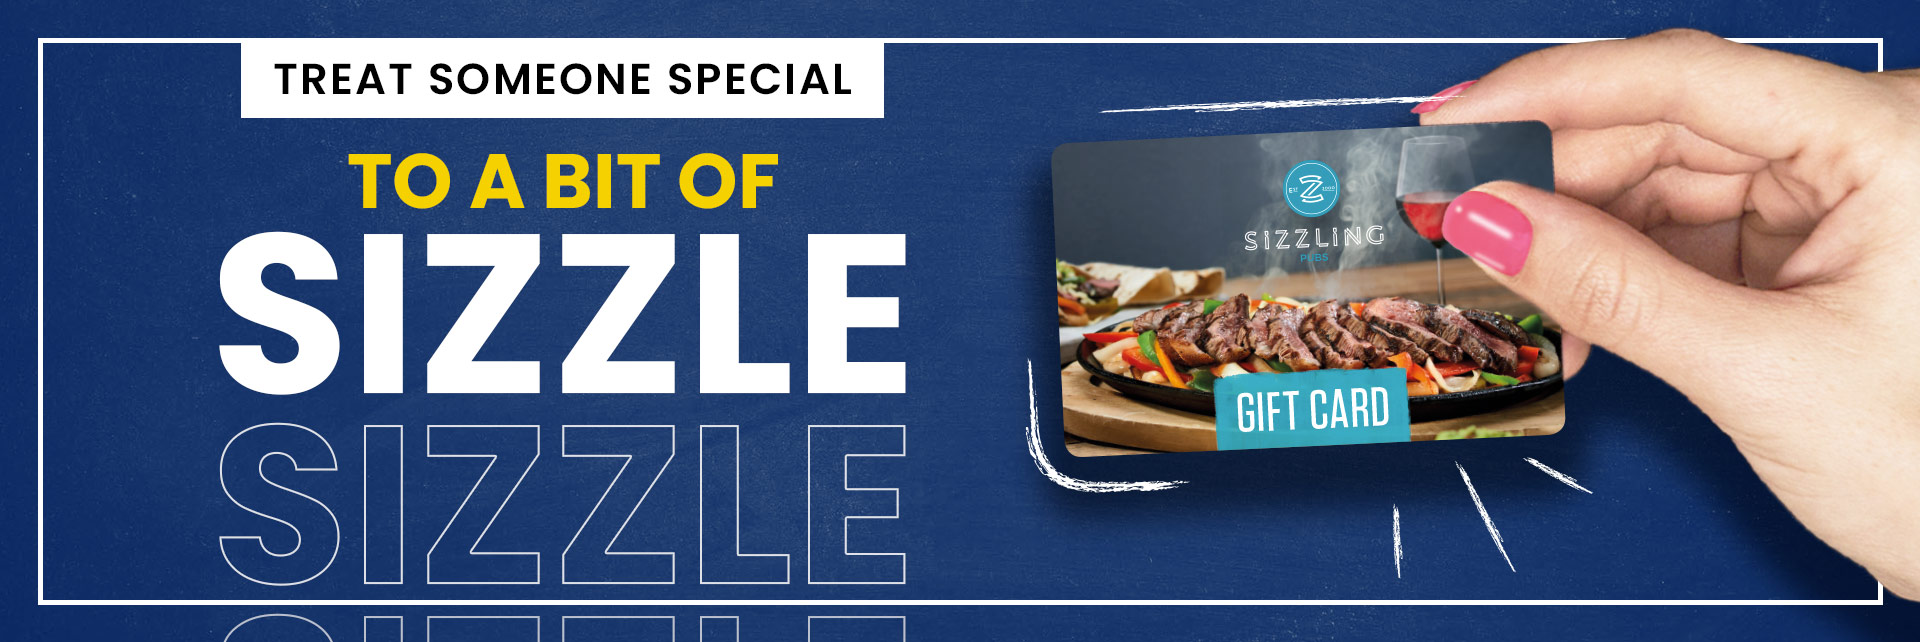 Sizzling Pubs Gift Card at Henry Boddington in Salford